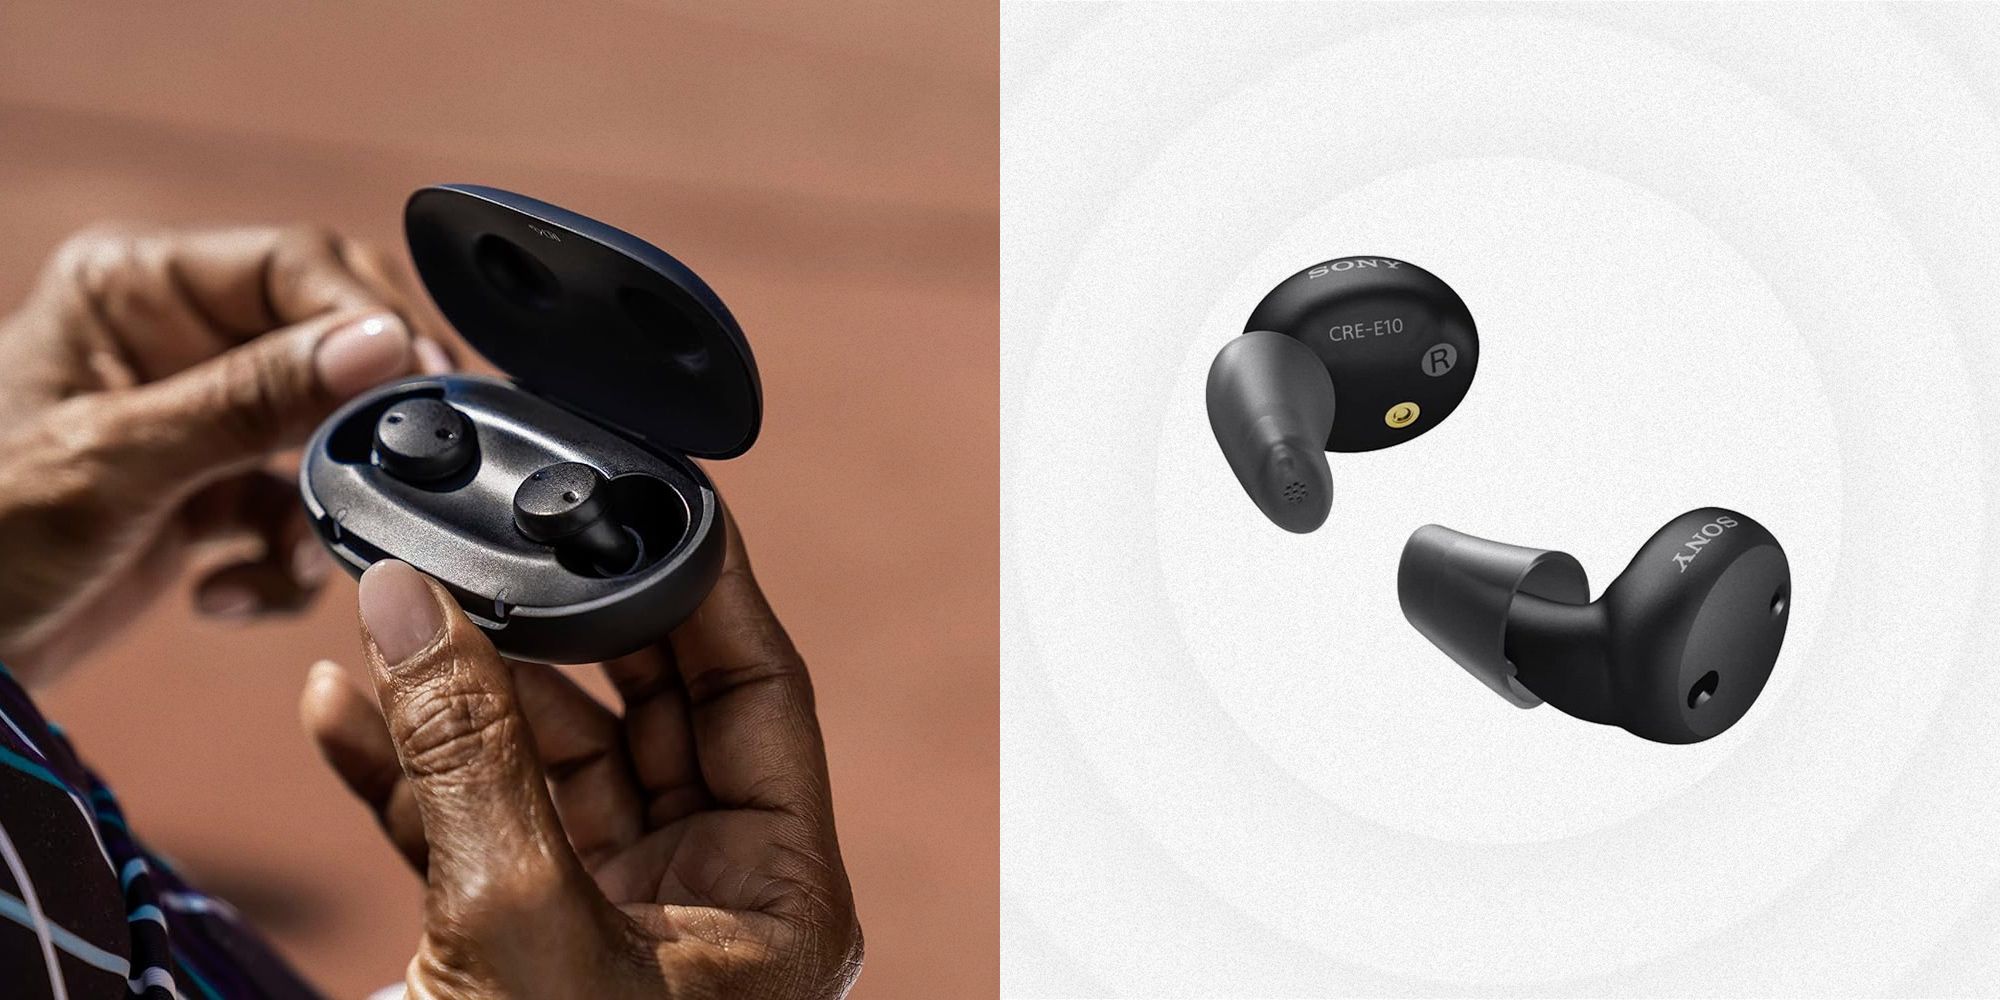 Over-the-Counter Hearing Aids Could Finally Give People an Affordable,  Convenient Hearing Solution